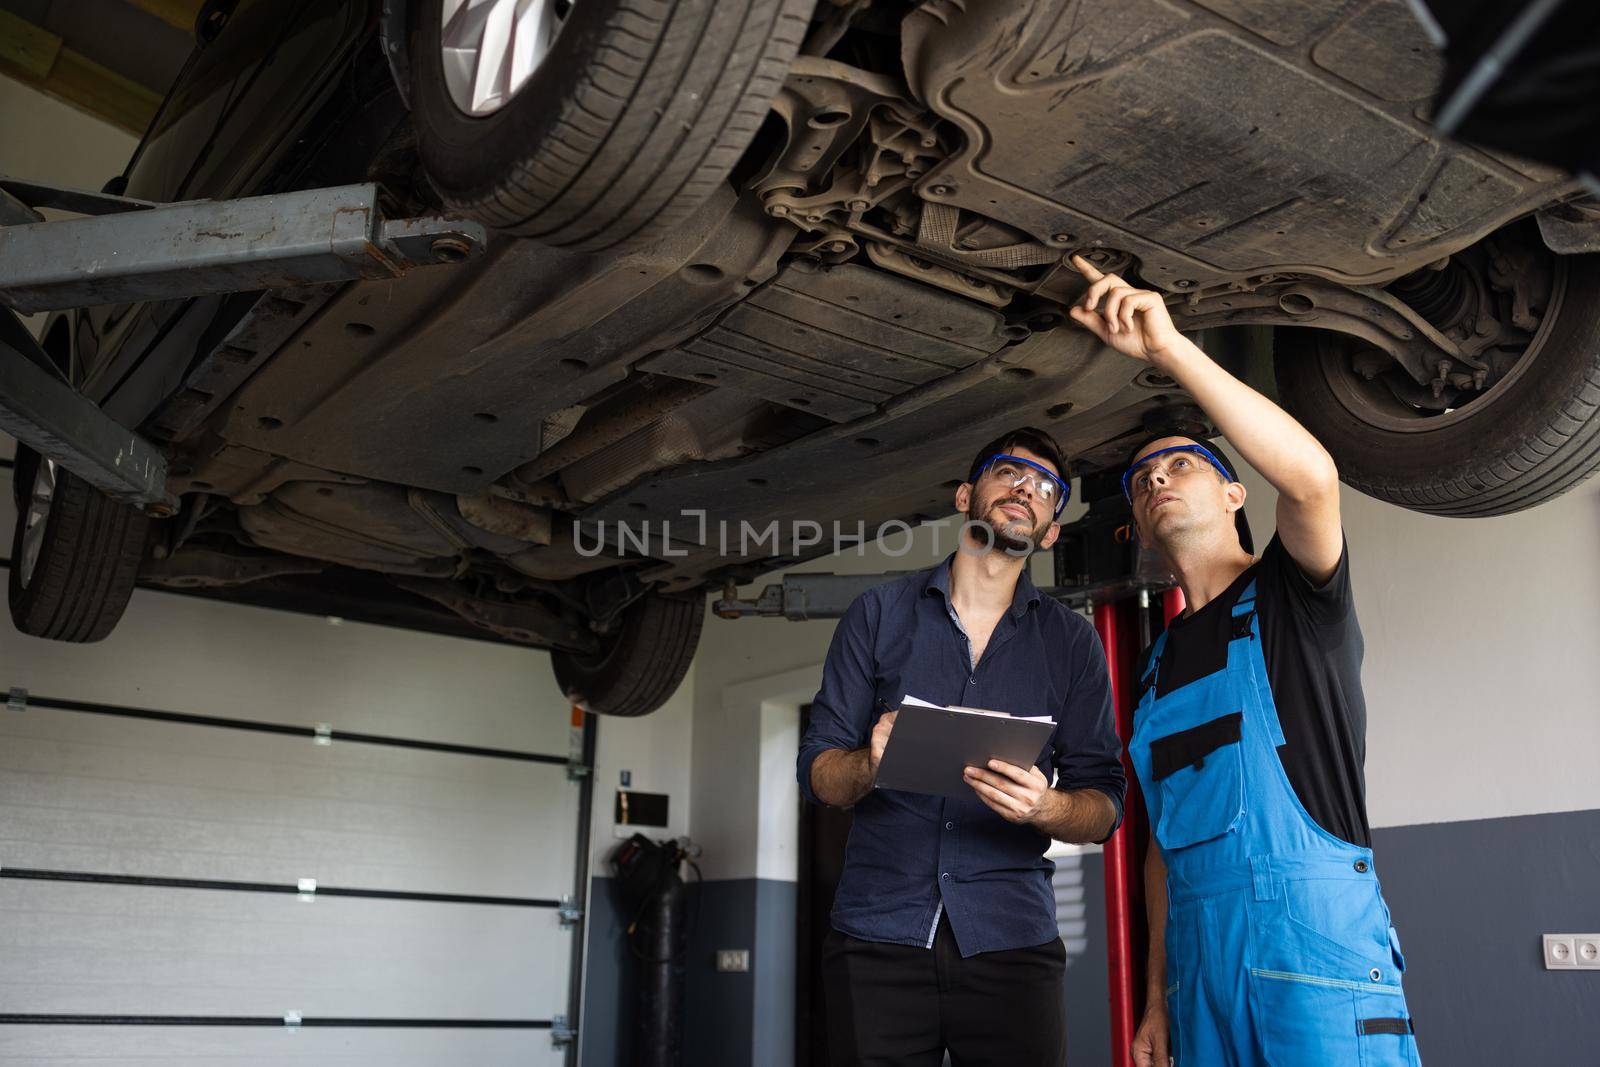 Auto Service. Car Service Employees Inspect the Bottom and Skid Plates of the Car. Manager Checks Data on a Notebook and Explains the Breakdown to a Mechanic. Modern Workshop.